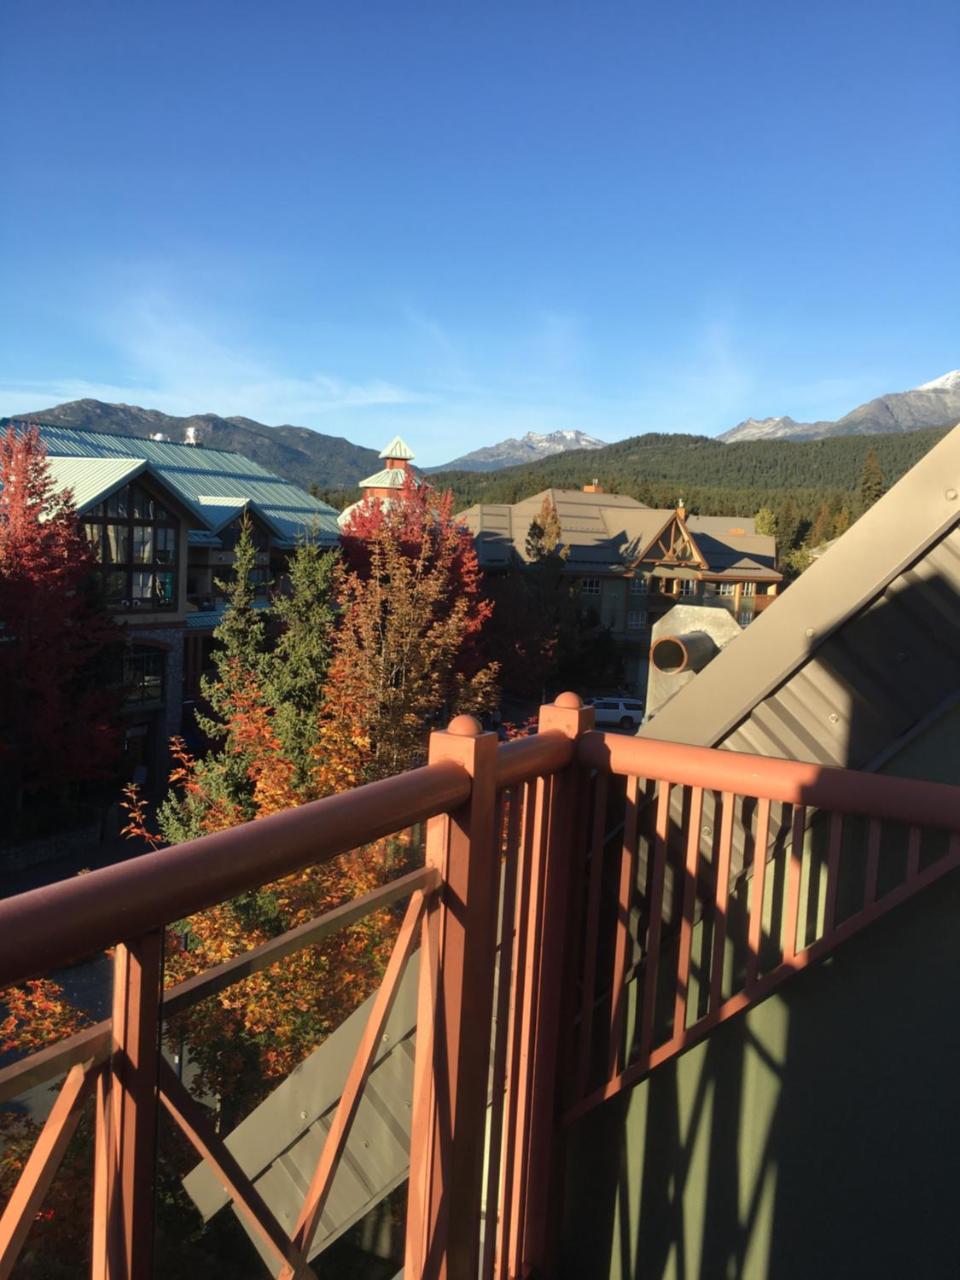 Beautiful Whistler Village Alpenglow Suite Queen Size Bed Air Conditioning Cable And Smarttv Wifi Fireplace Pool Hot Tub Sauna Gym Balcony Mountain Views Buitenkant foto